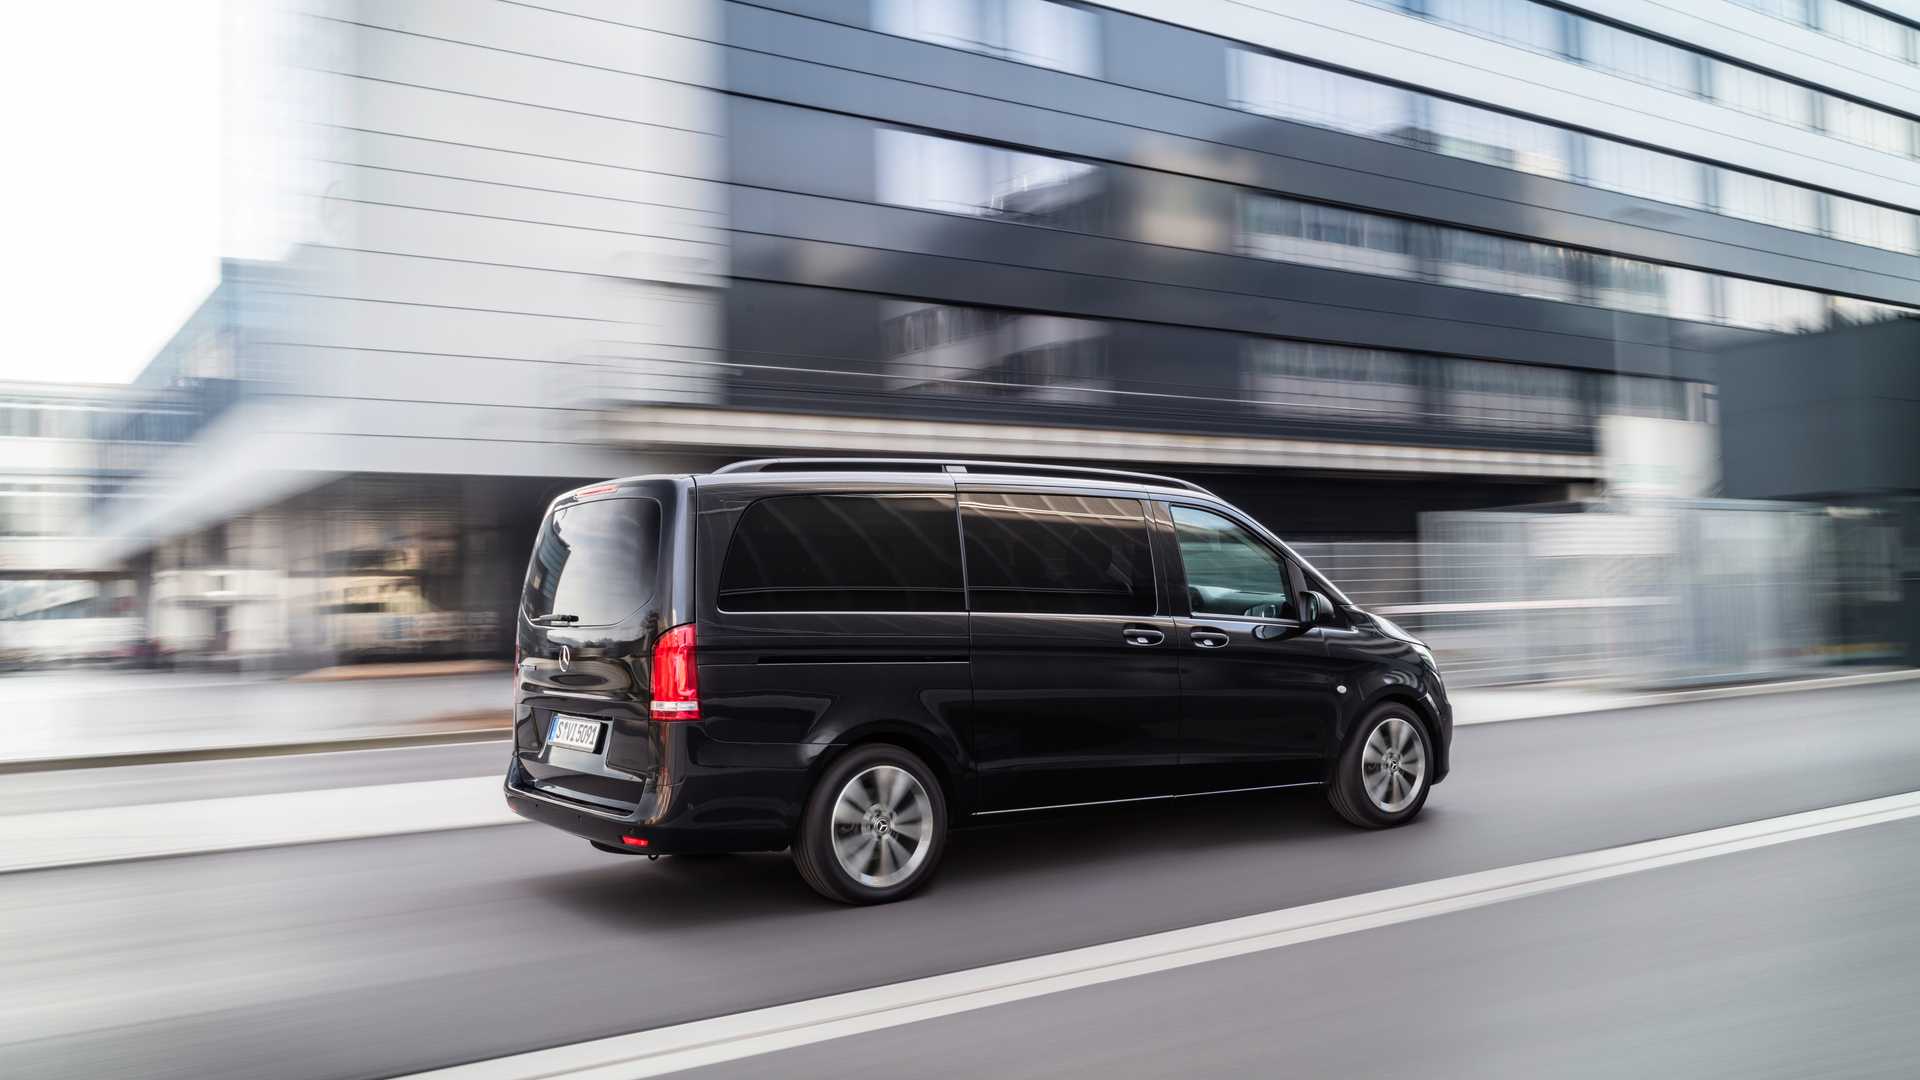 Mercedes-Benz Vito receives an update internally and externally with refreshing design, features, safety and technology that meets customers demands